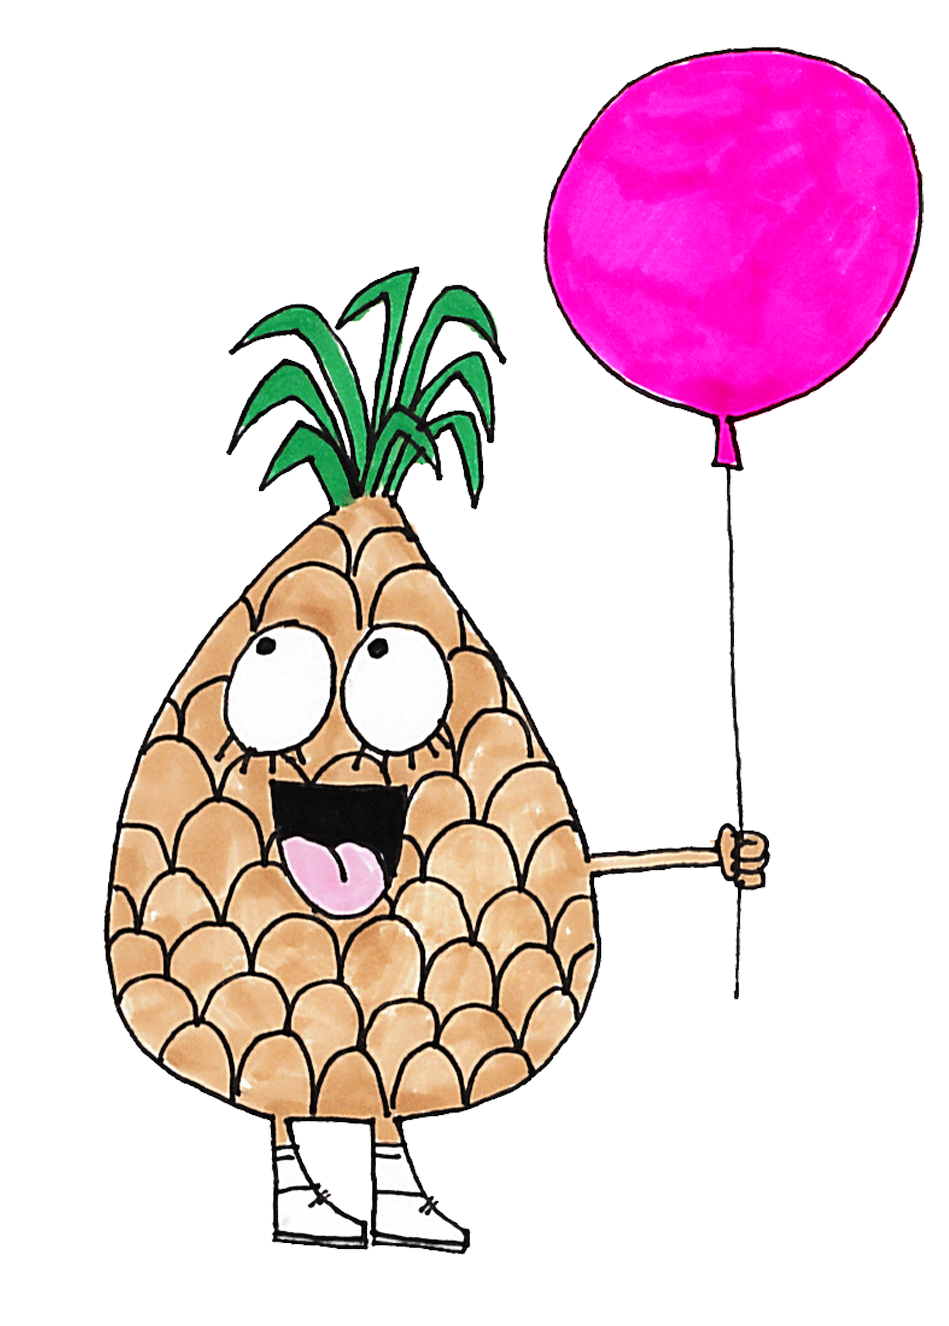 pineapple clipart coloured